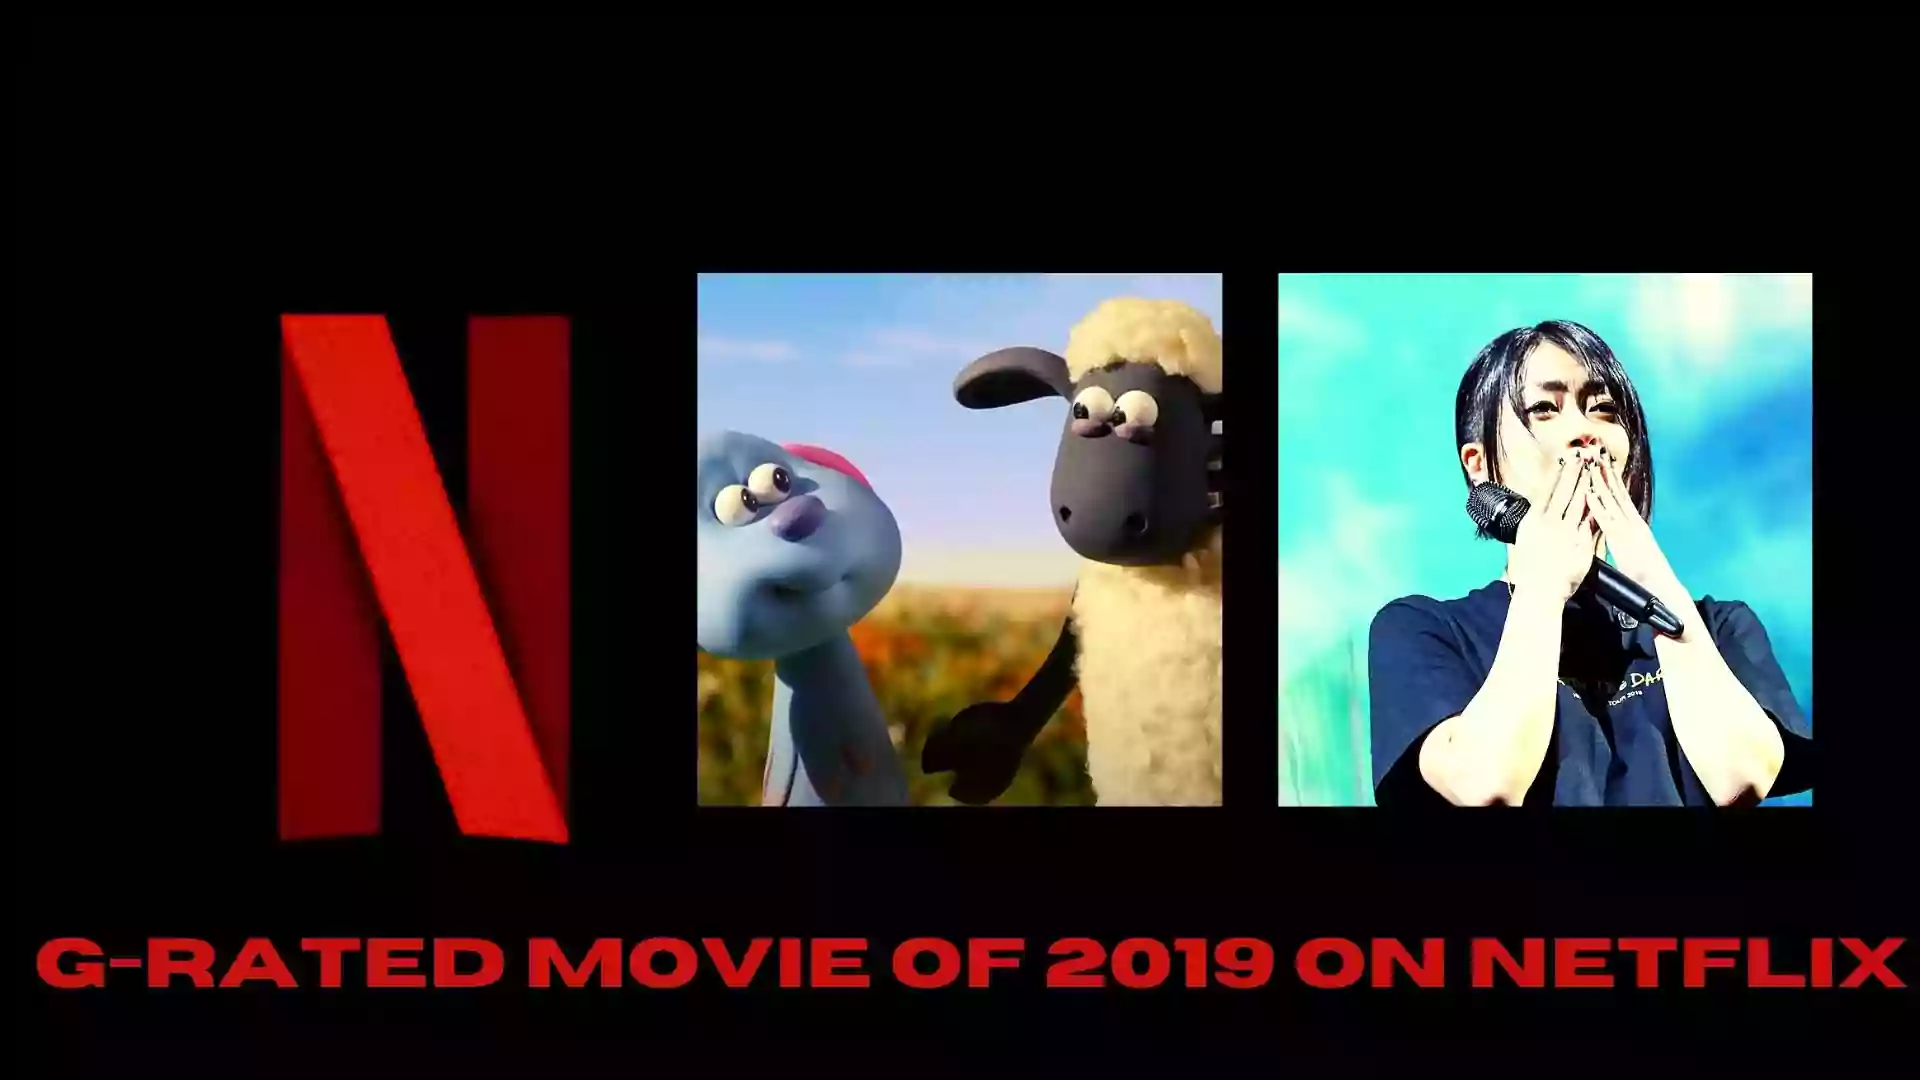 G-Rated Movie of 2019 on Netflix